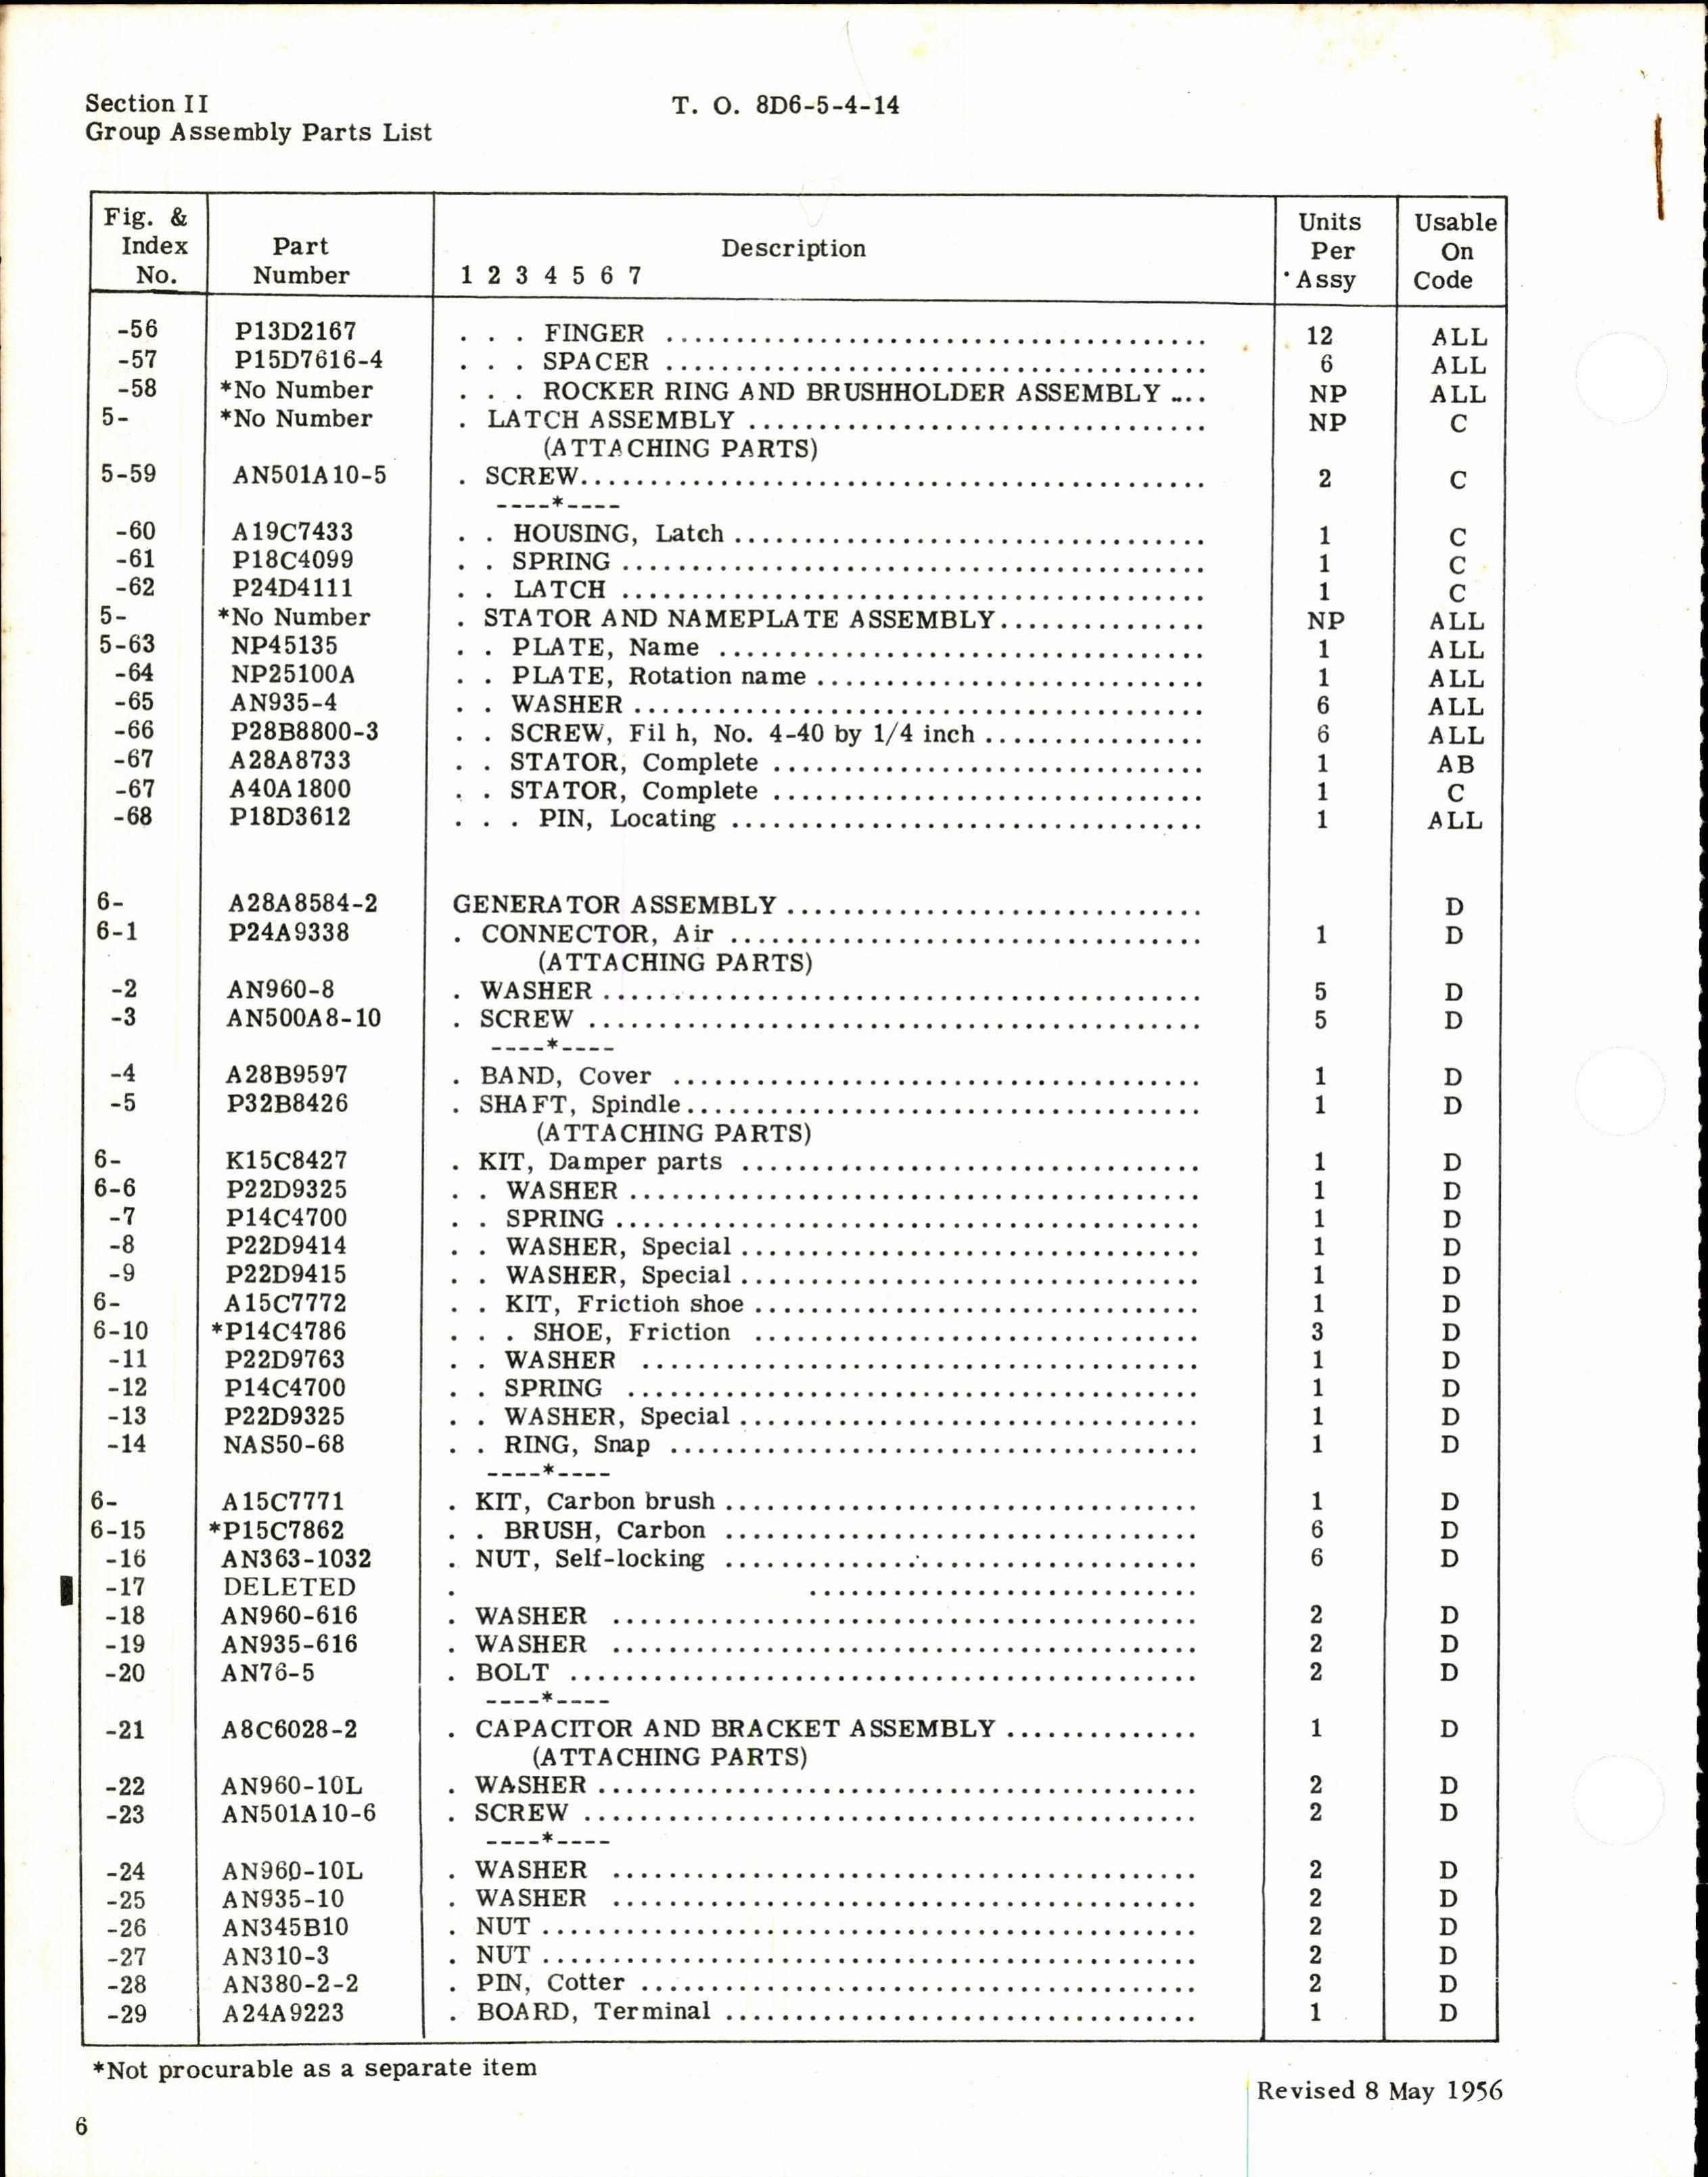 Sample page 4 from AirCorps Library document: Illustrated Parts Breakdown for Westinghouse D-C Generator